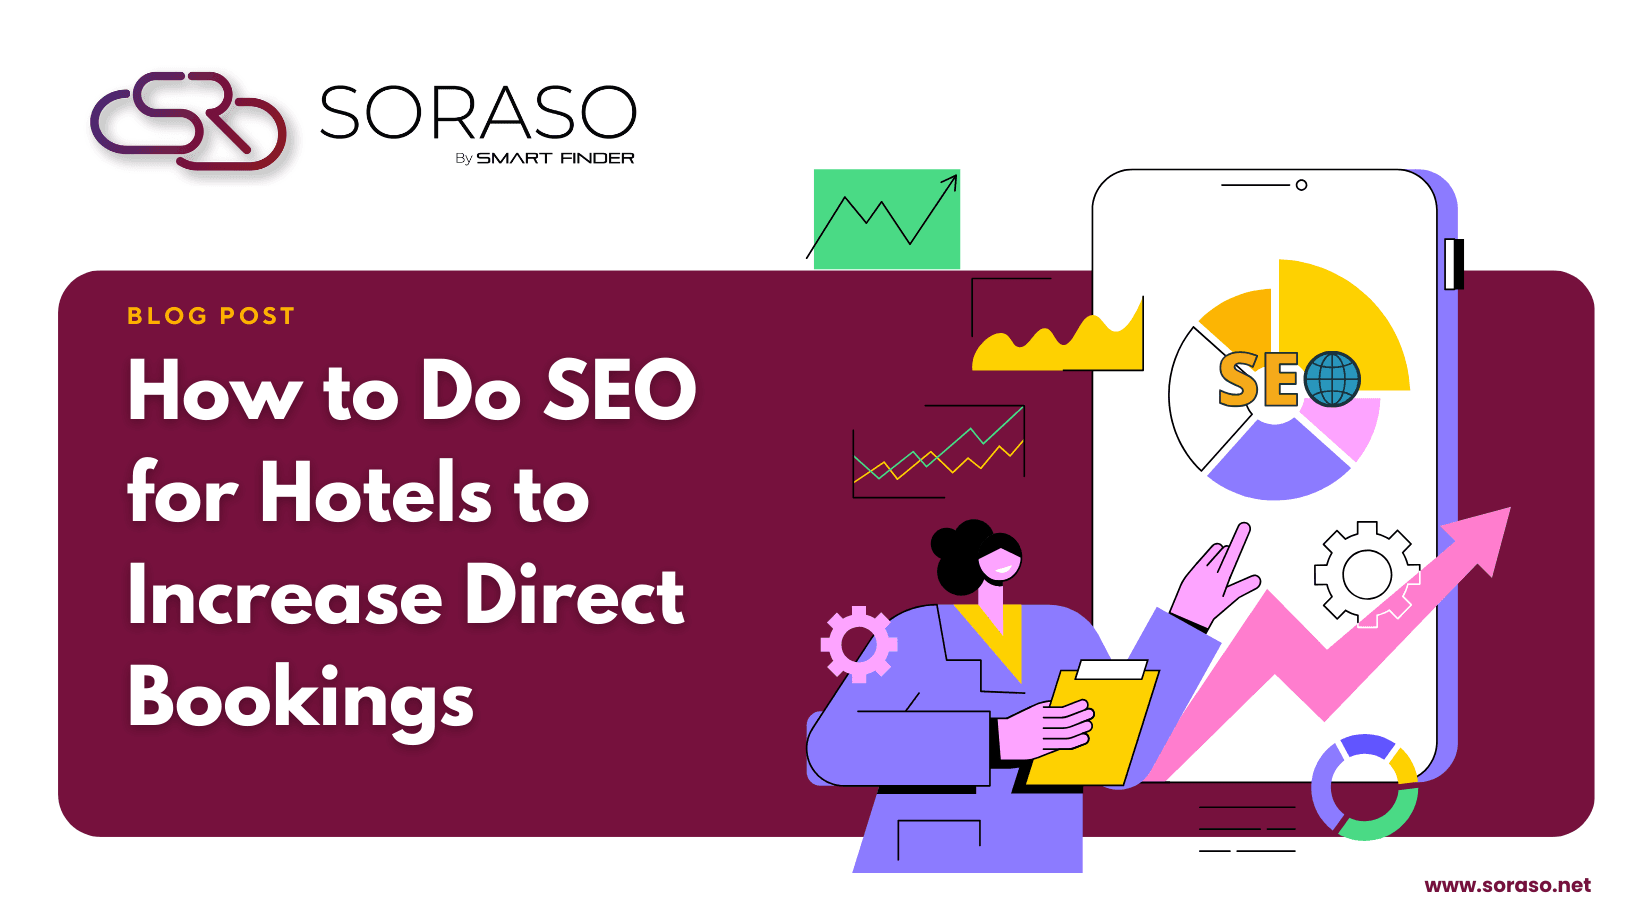 How to Do SEO for Hotels to Increase Direct Bookings